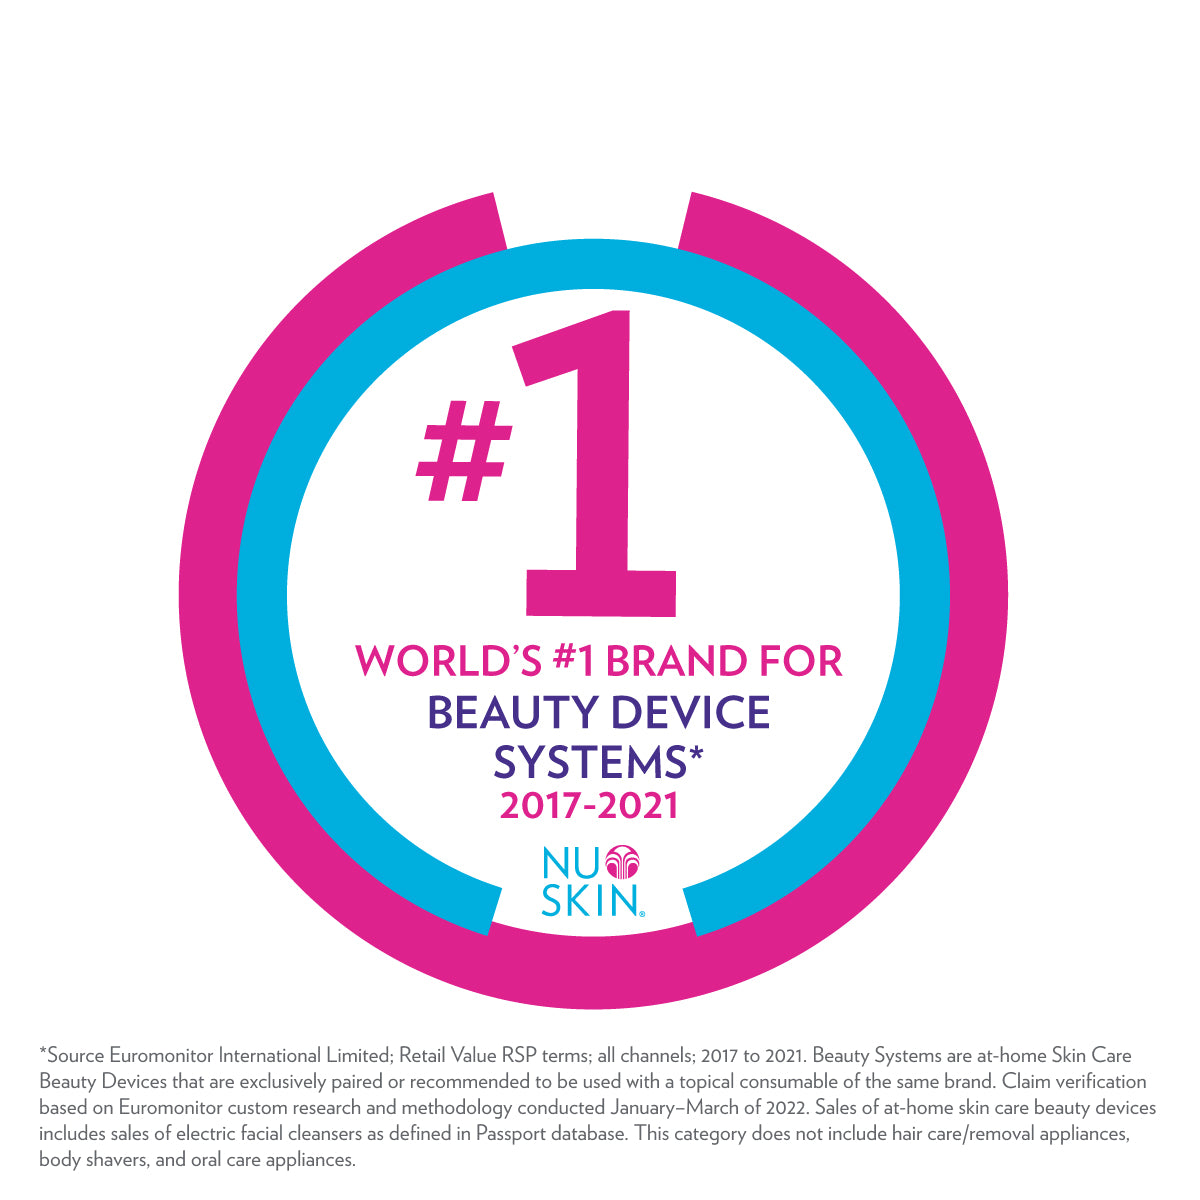 Nu Skin is the world's No. 1 home spa beauty device system. This also includes ageLOC Boost.